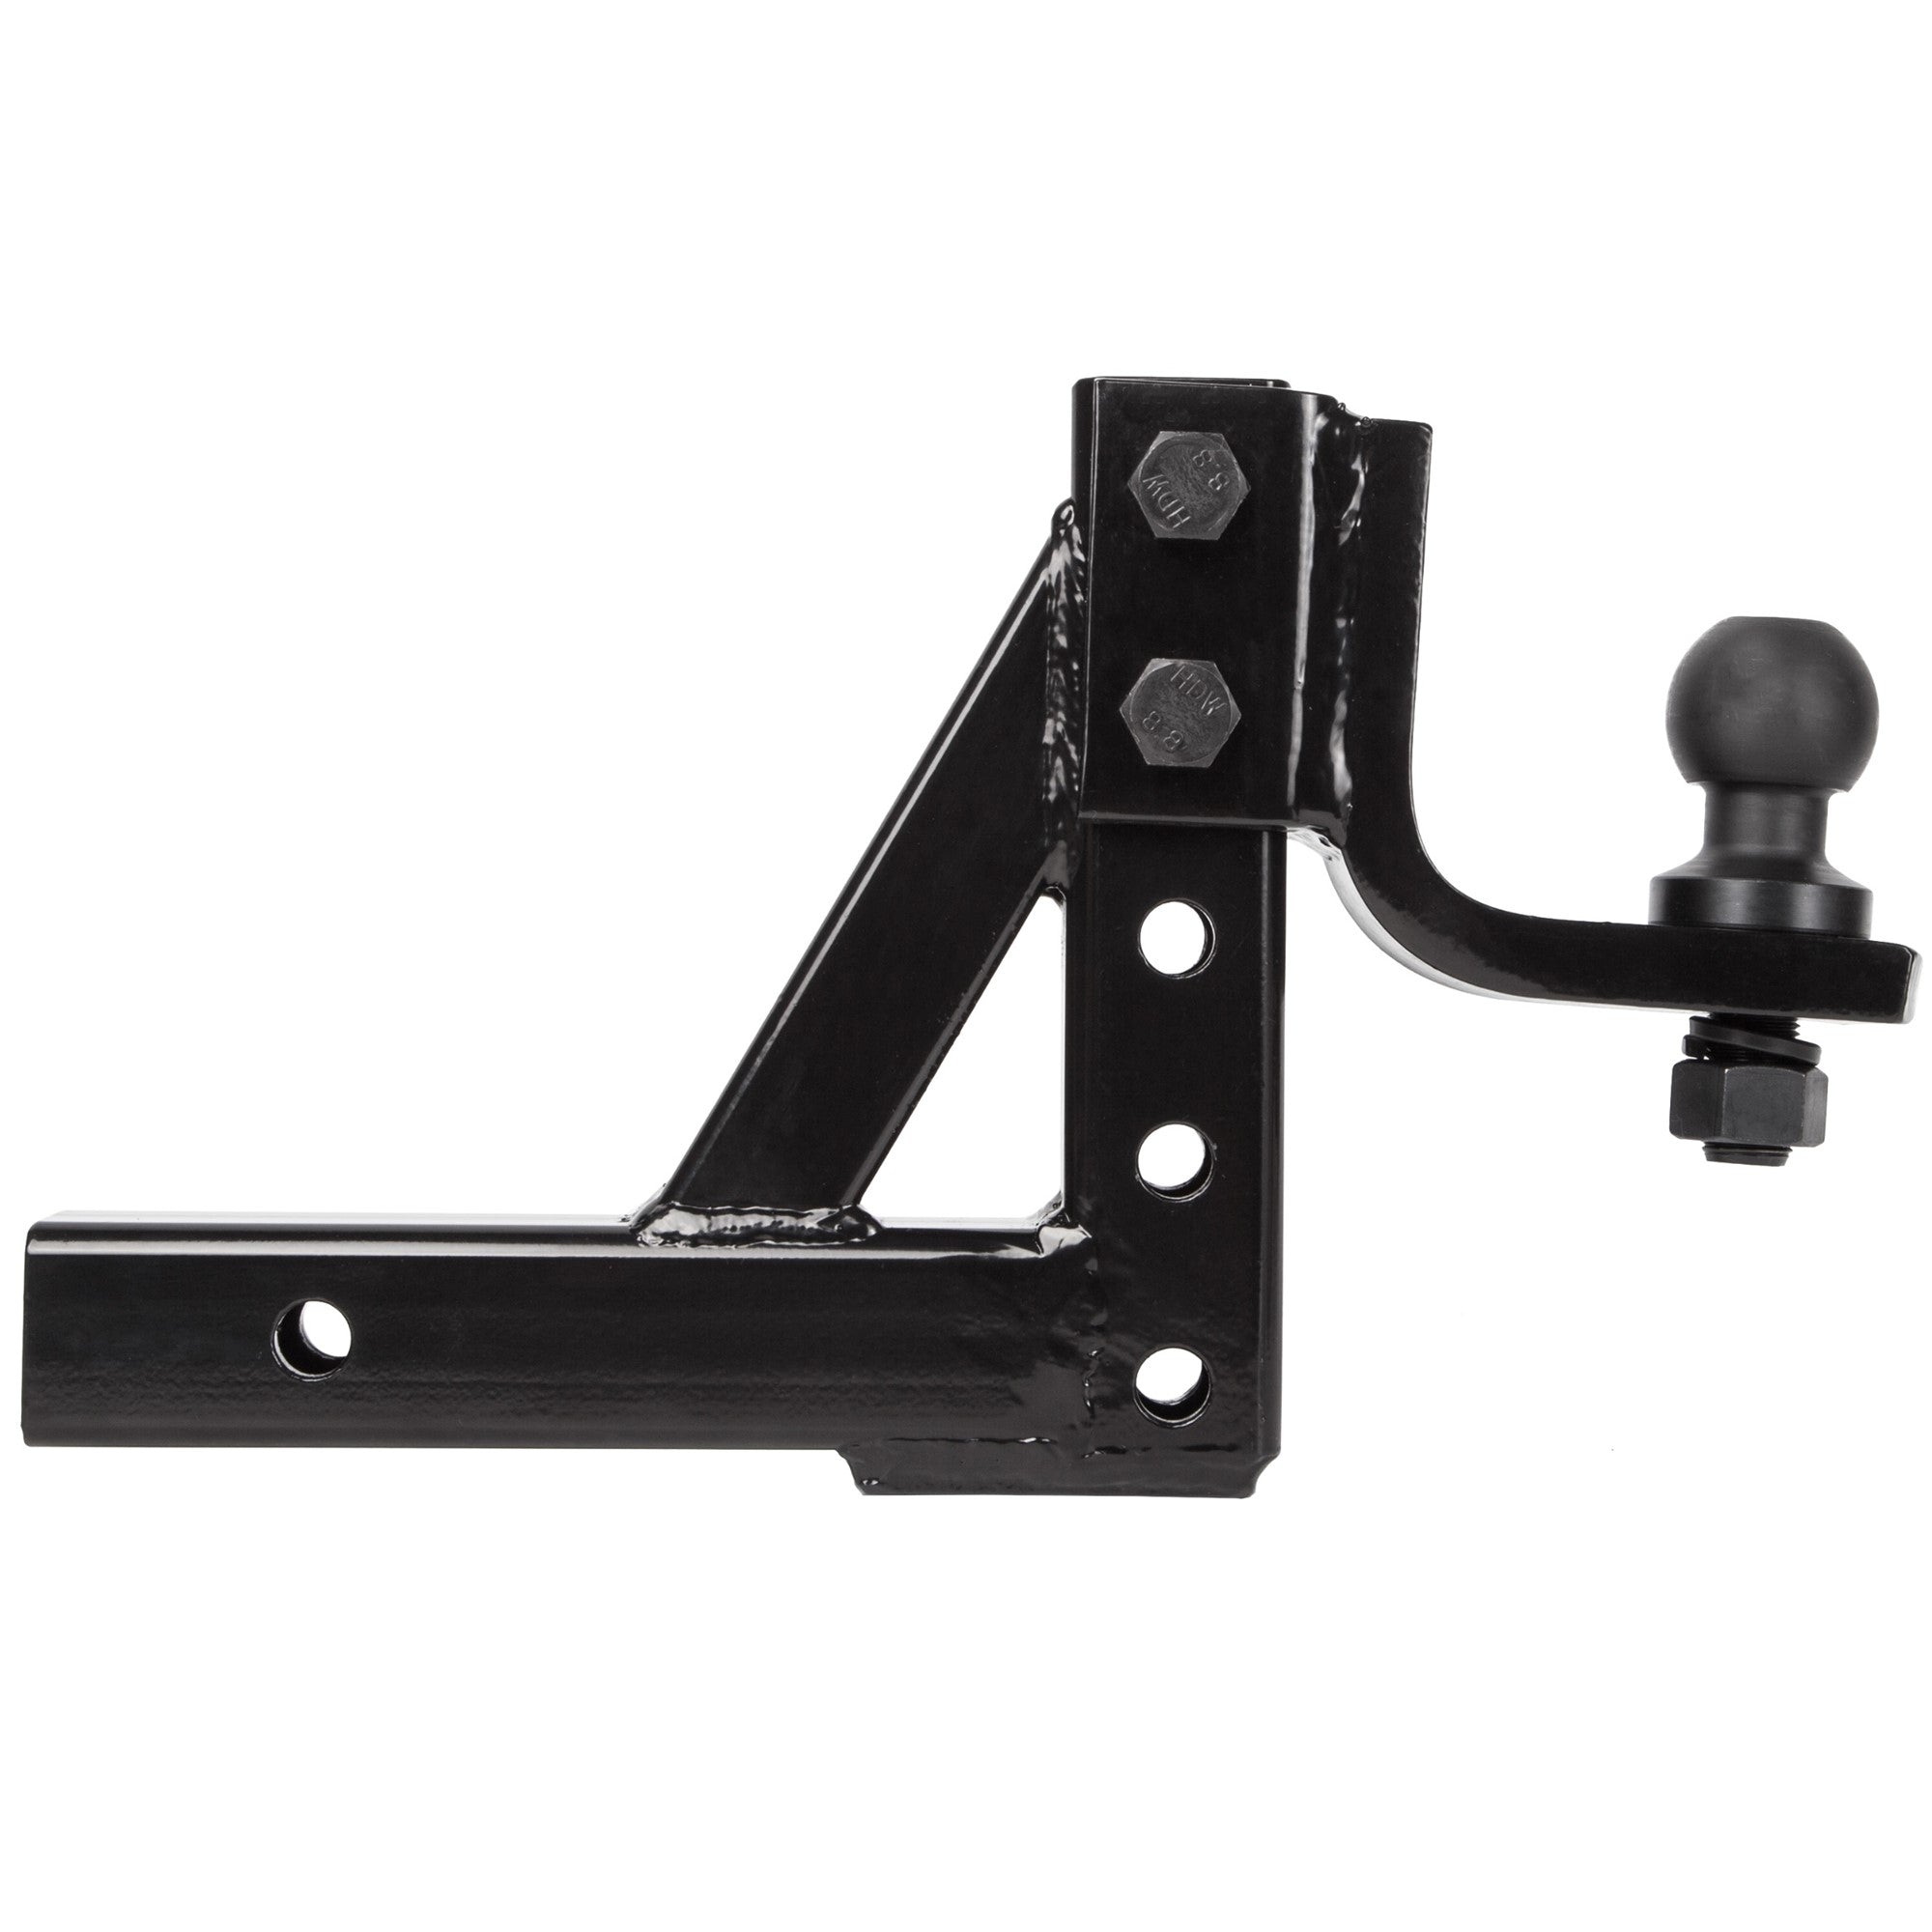 Trailer hitch ball mounts with an extra-durable steel powder coat finish